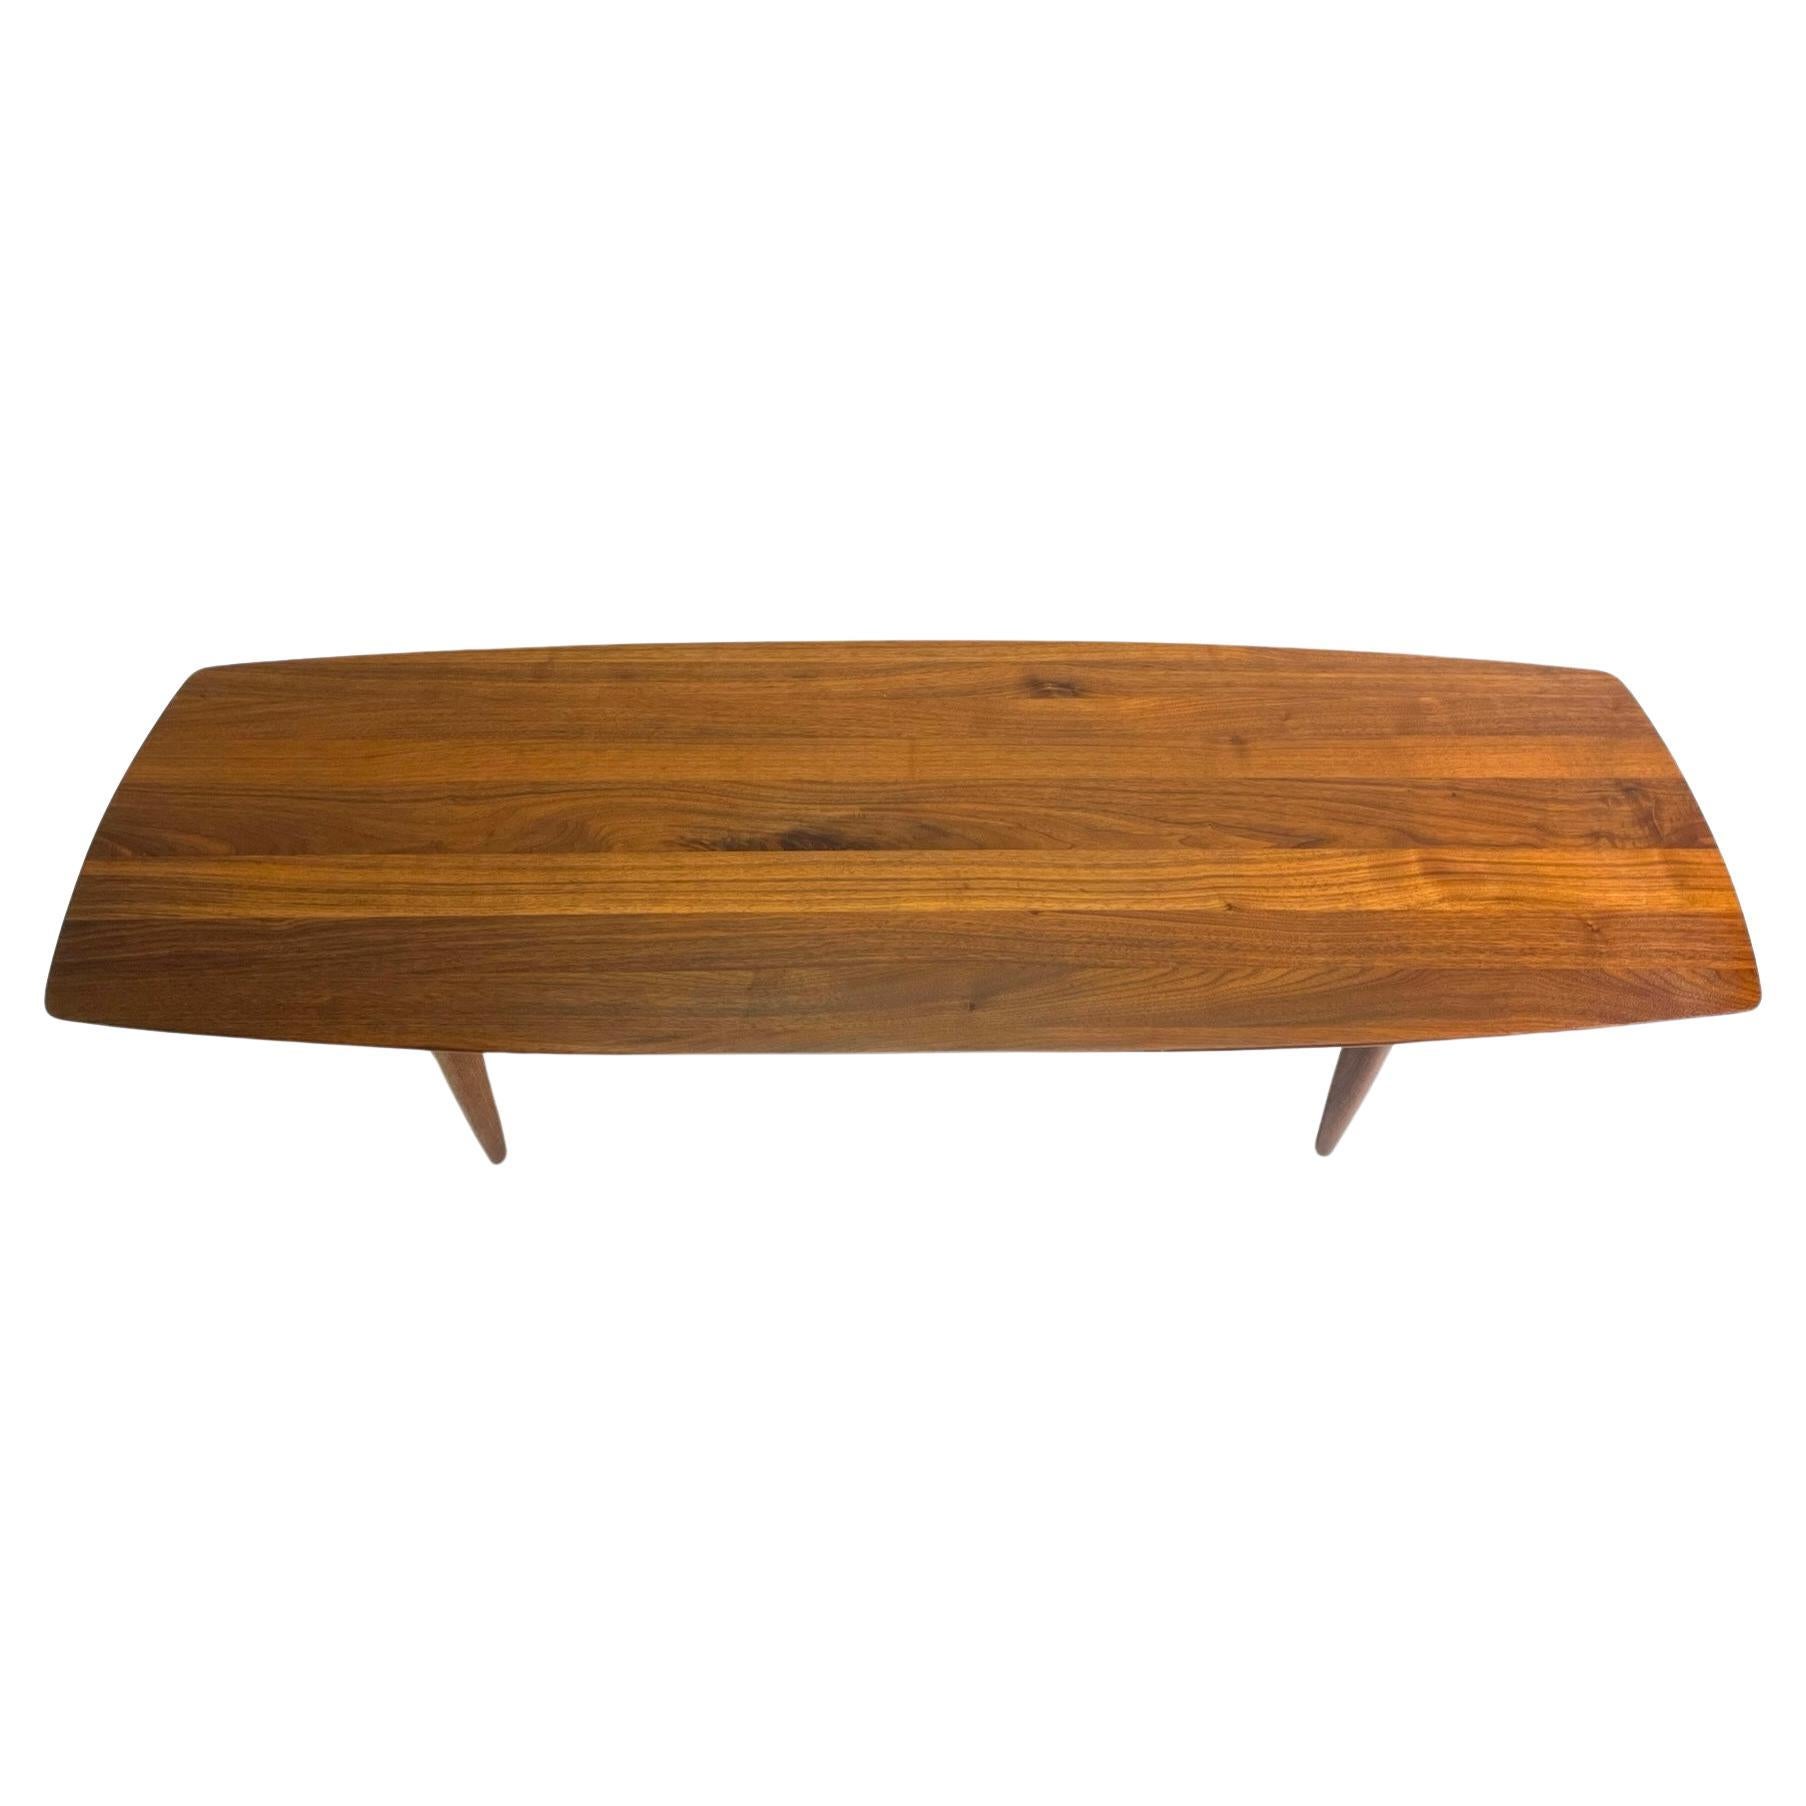 Classic mid century coffee table, made in California, by Ace-Hi as part of the Prelude line. This table is pure gorgeous wood grain, elegant shape and mid century modern magic! 
There are very few pieces of furniture made in solid wood for a couple